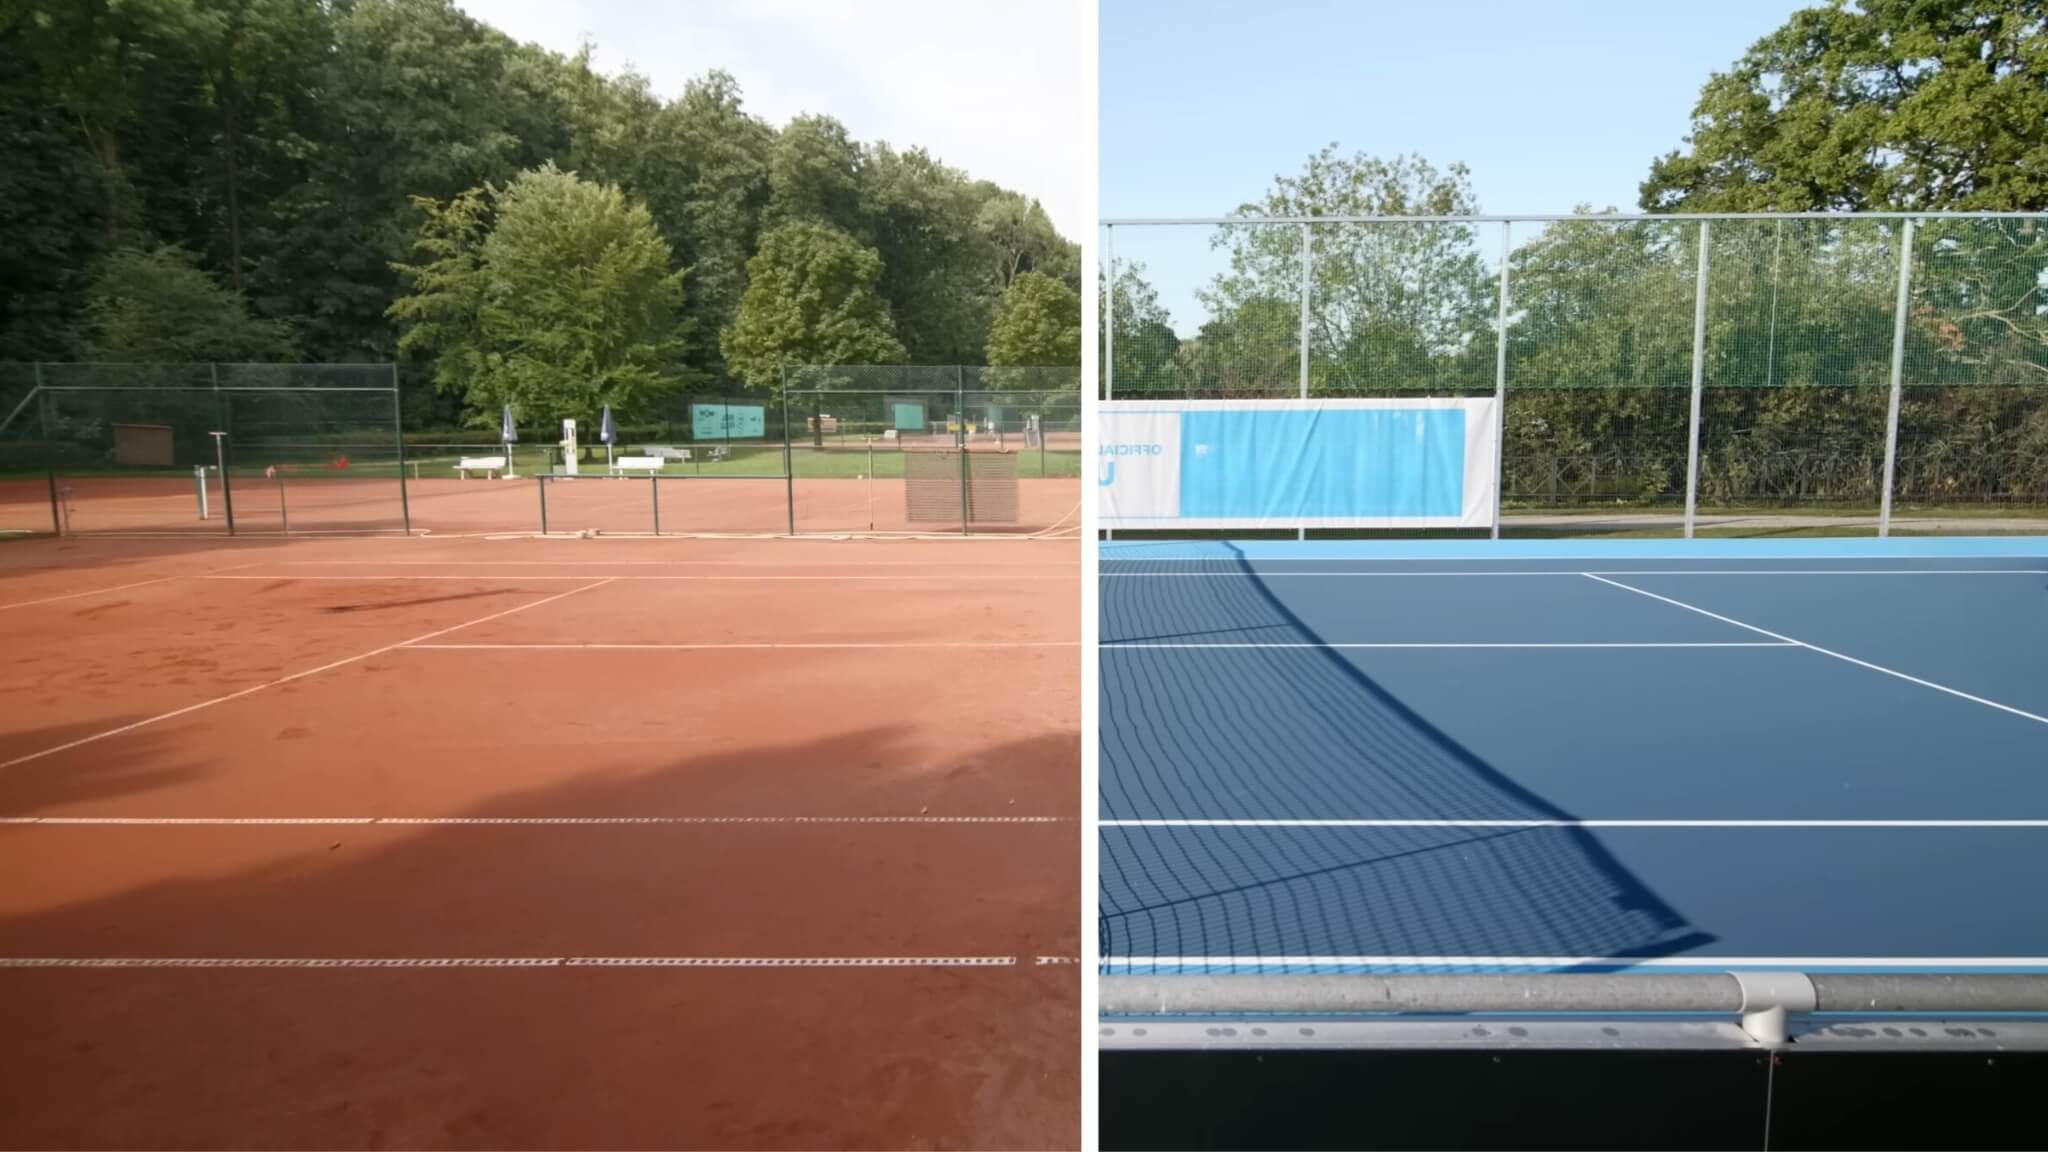 Comparisons of clay and hard court tennis surfaces